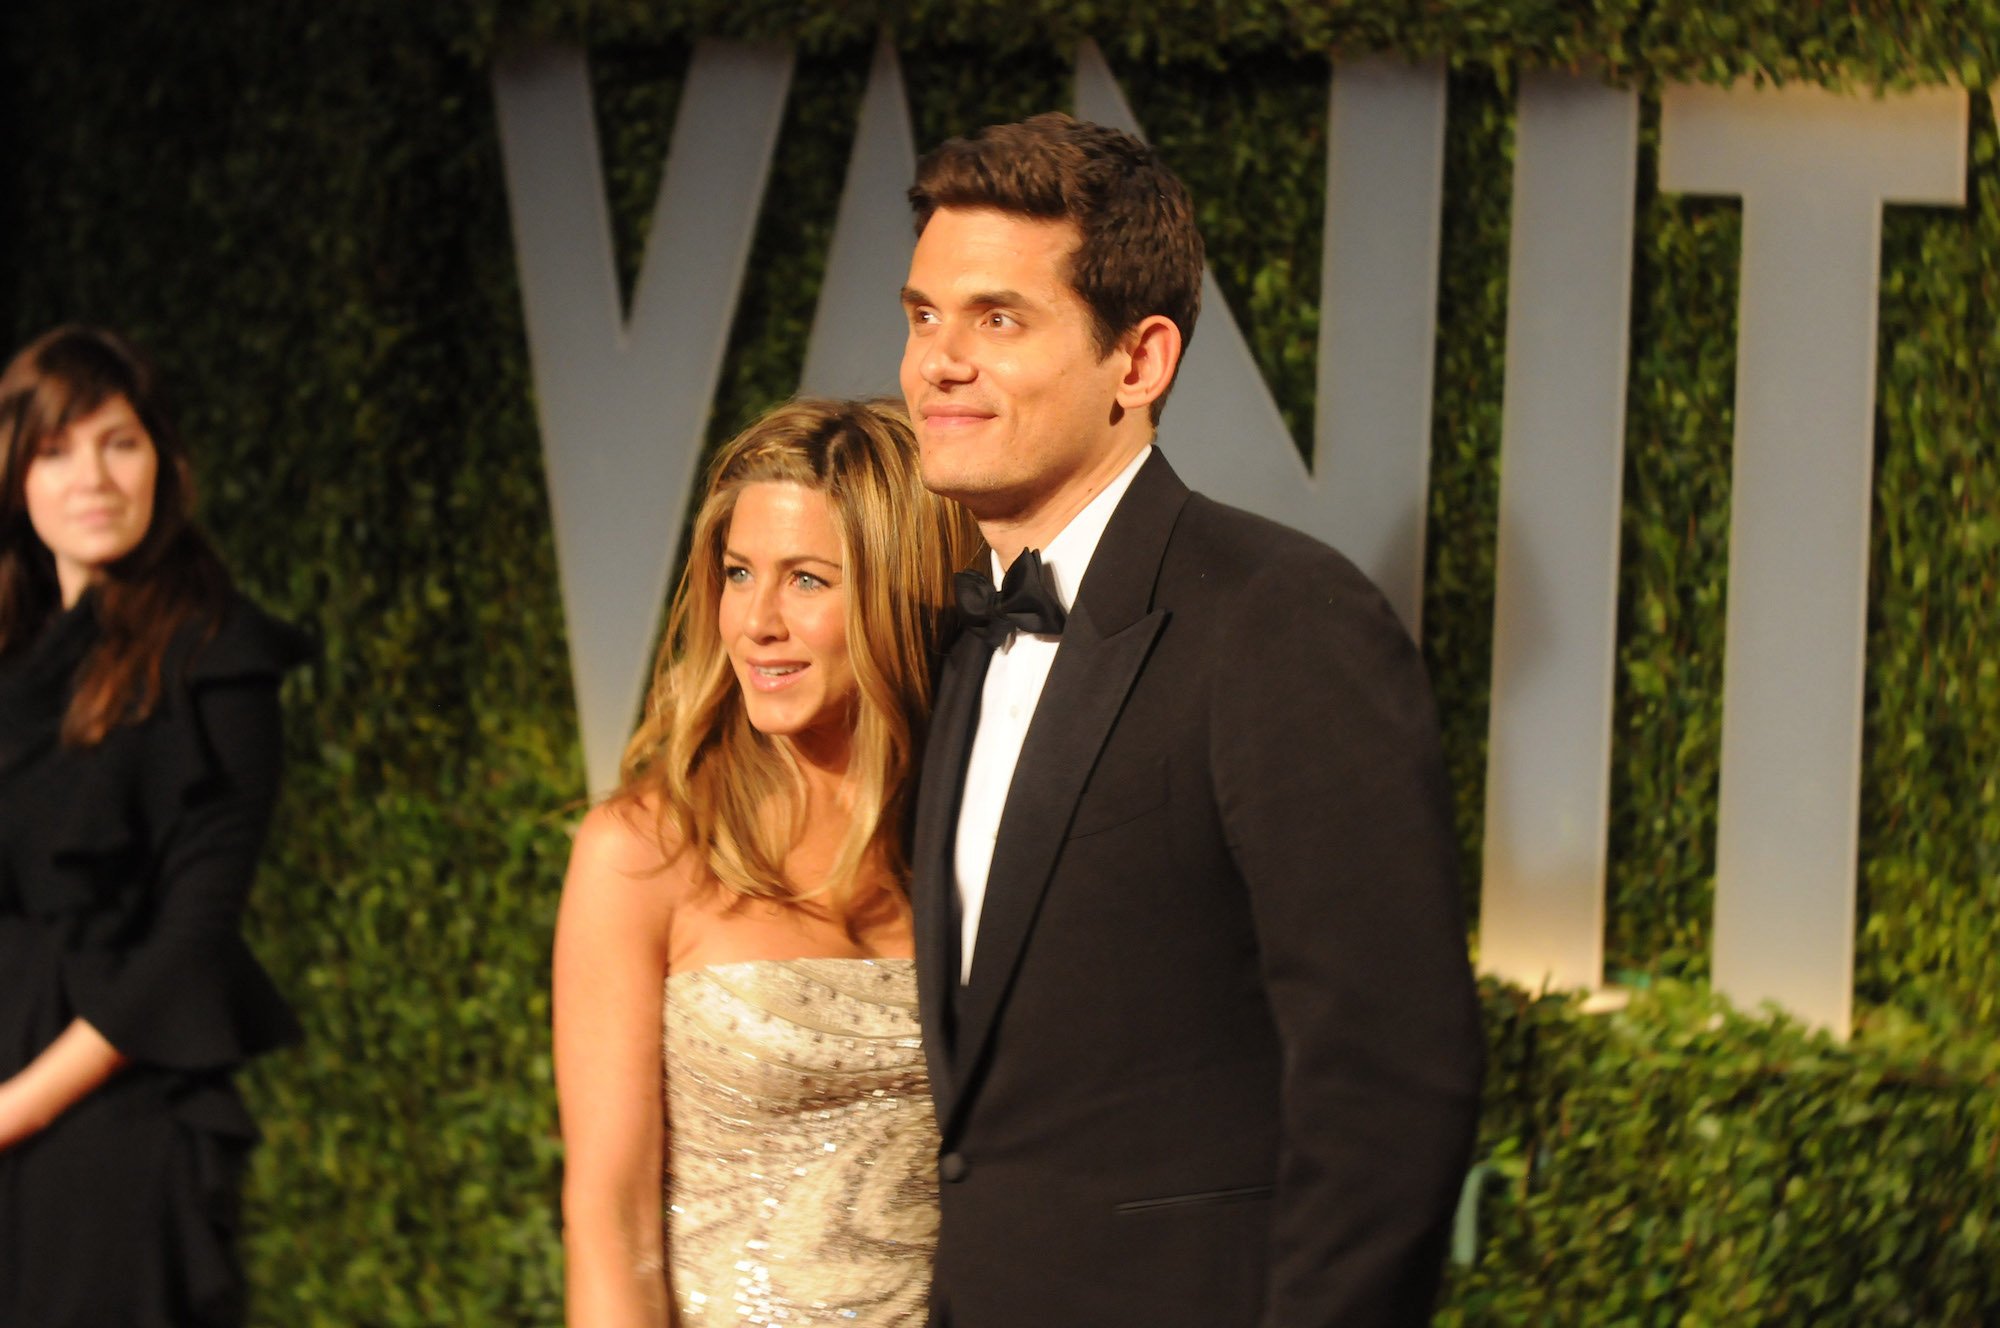 Jennifer Aniston and John Mayer attending the 2008 Vanity Fair Oscar Party in Hollywood